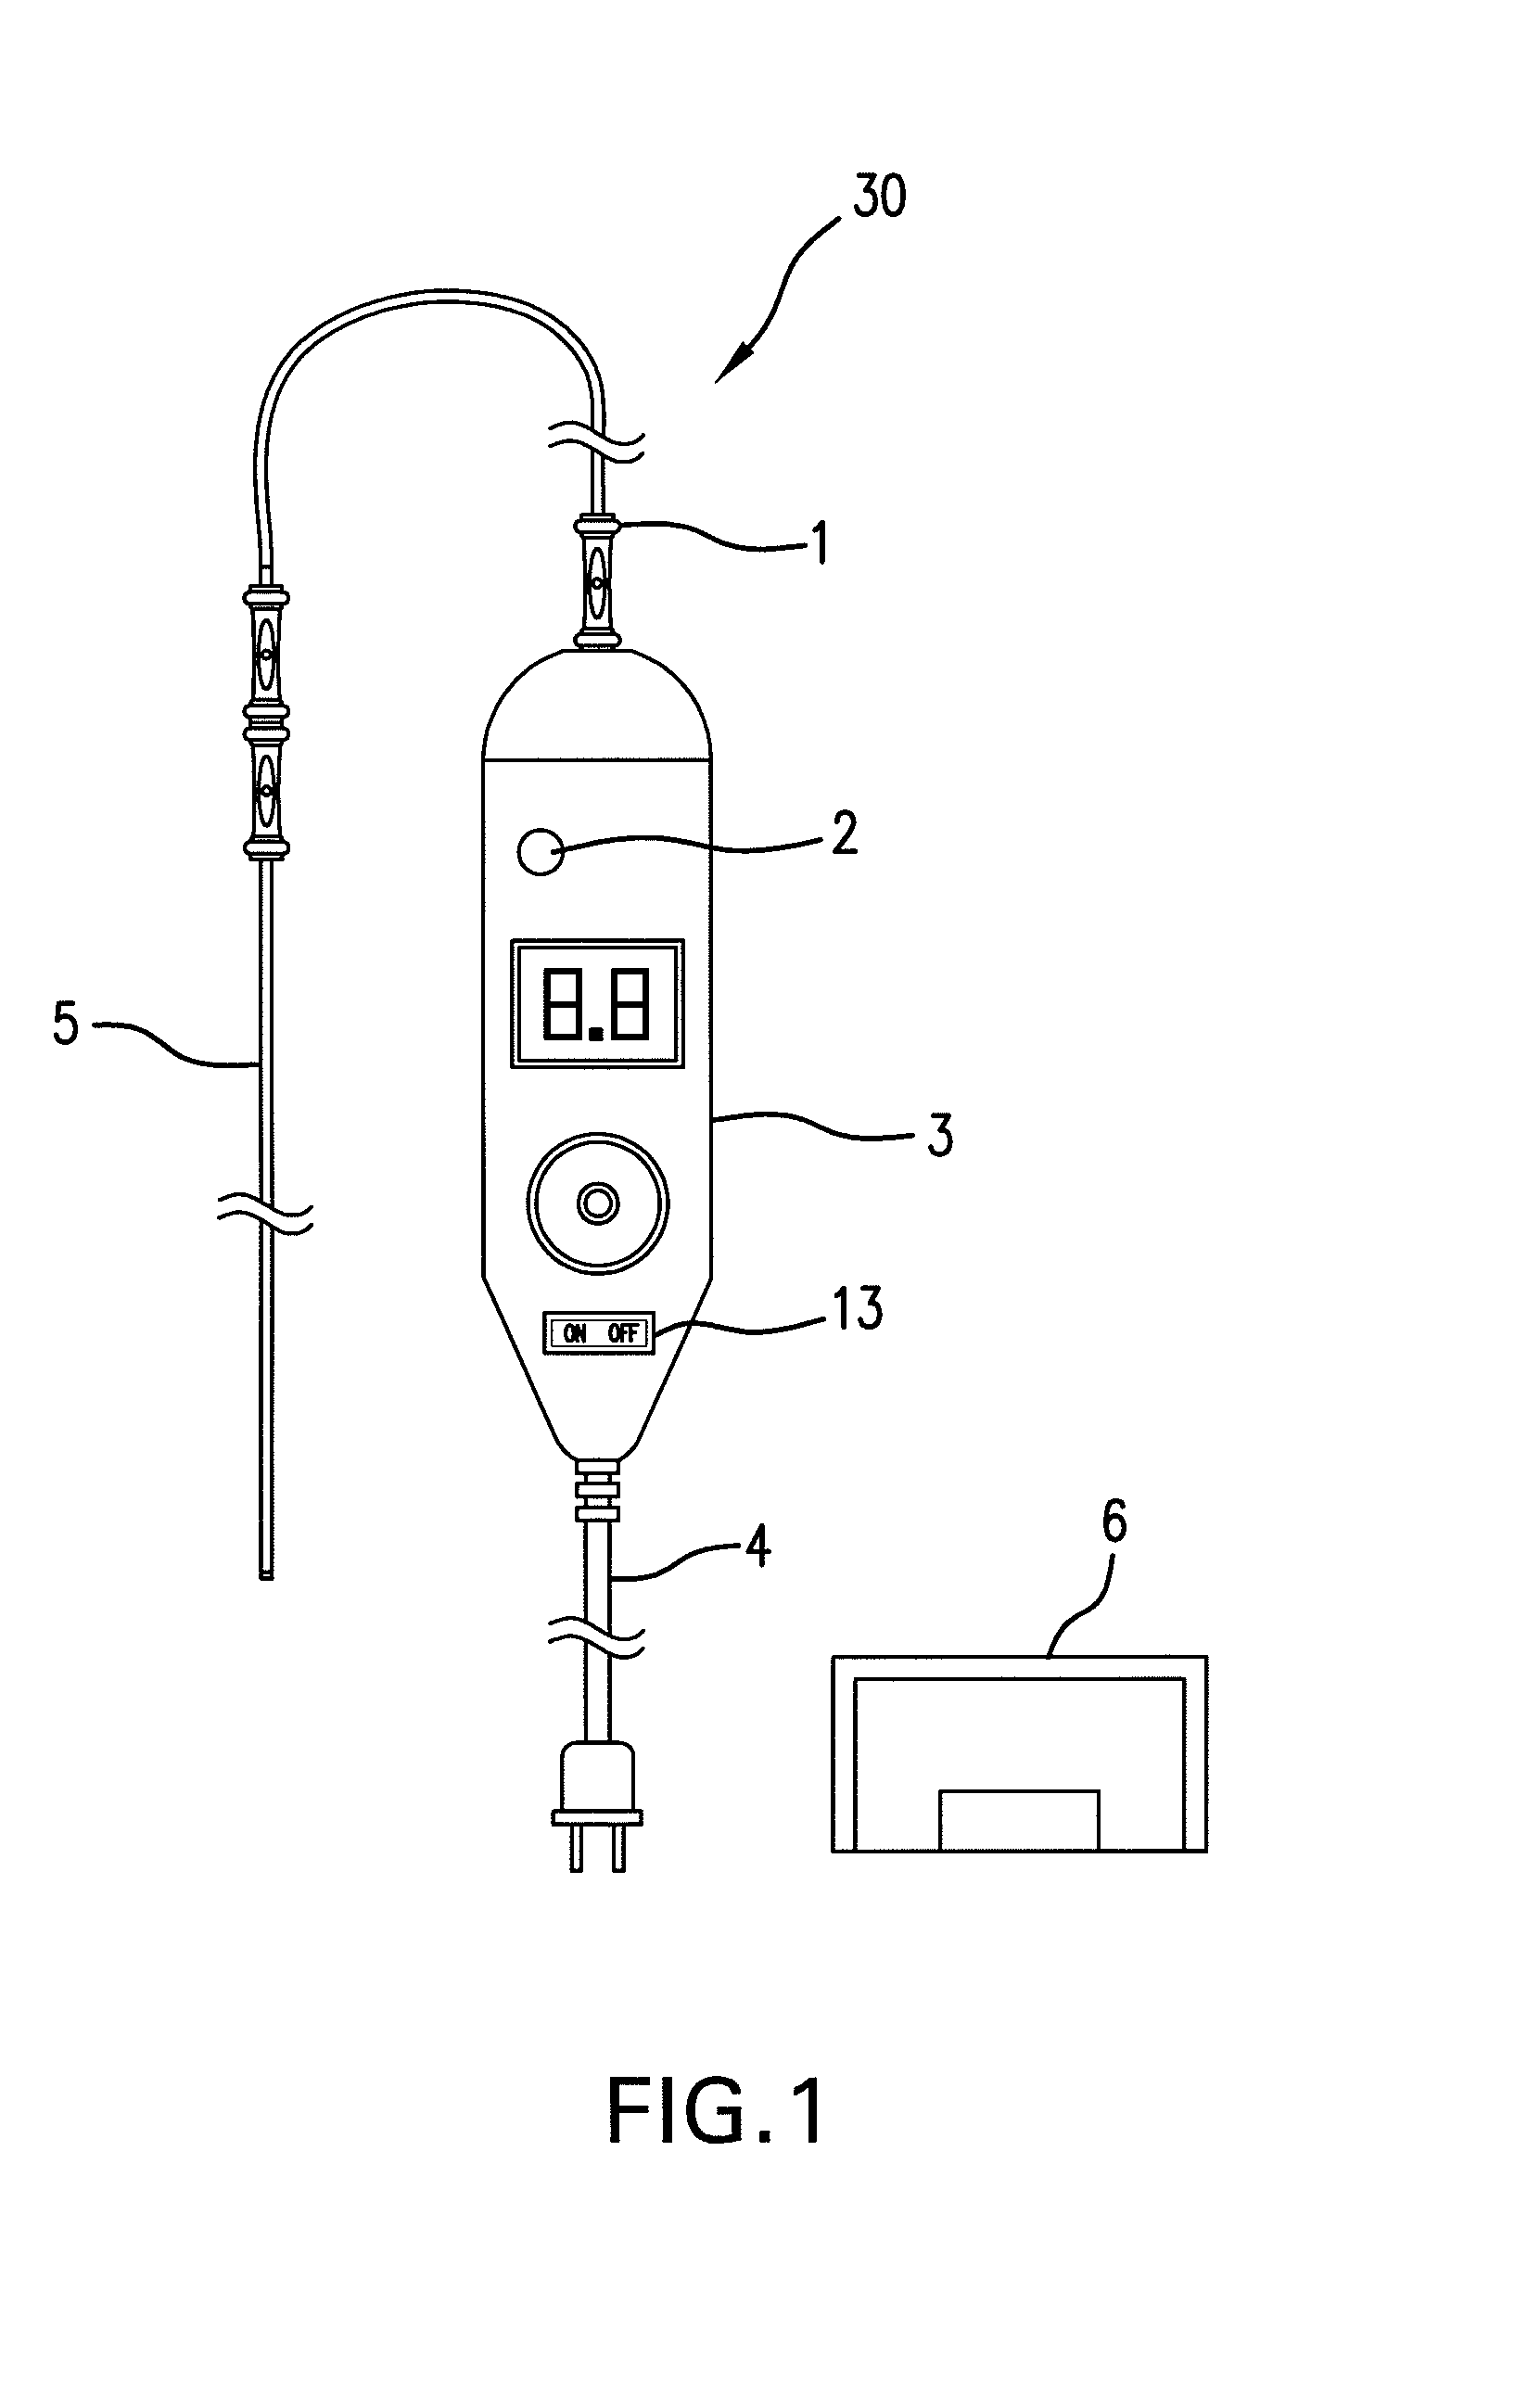 Flexible infrared delivery apparatus and method